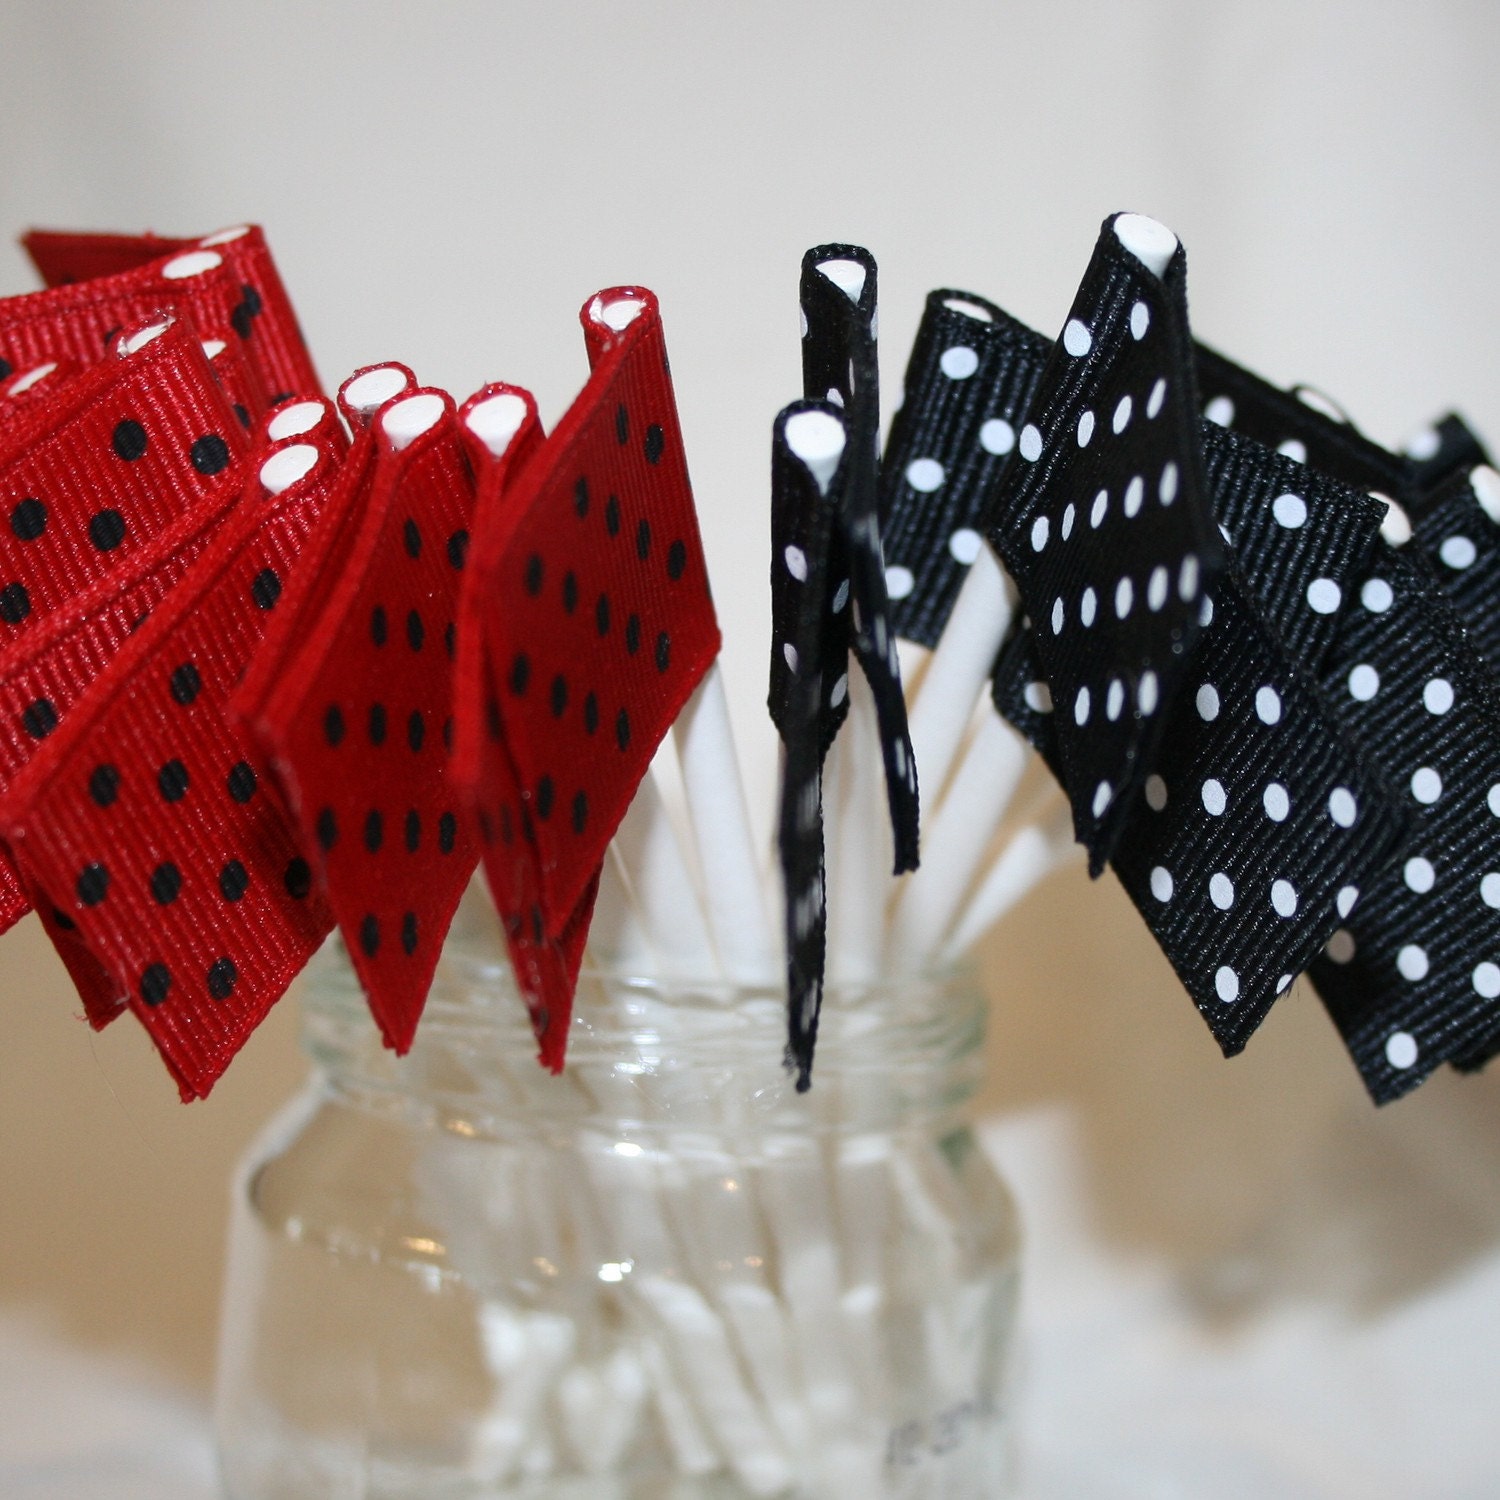 24 Mini Ribbon Flag Cupcake Toppers in Black and Red Swiss Dots (ready to ship)